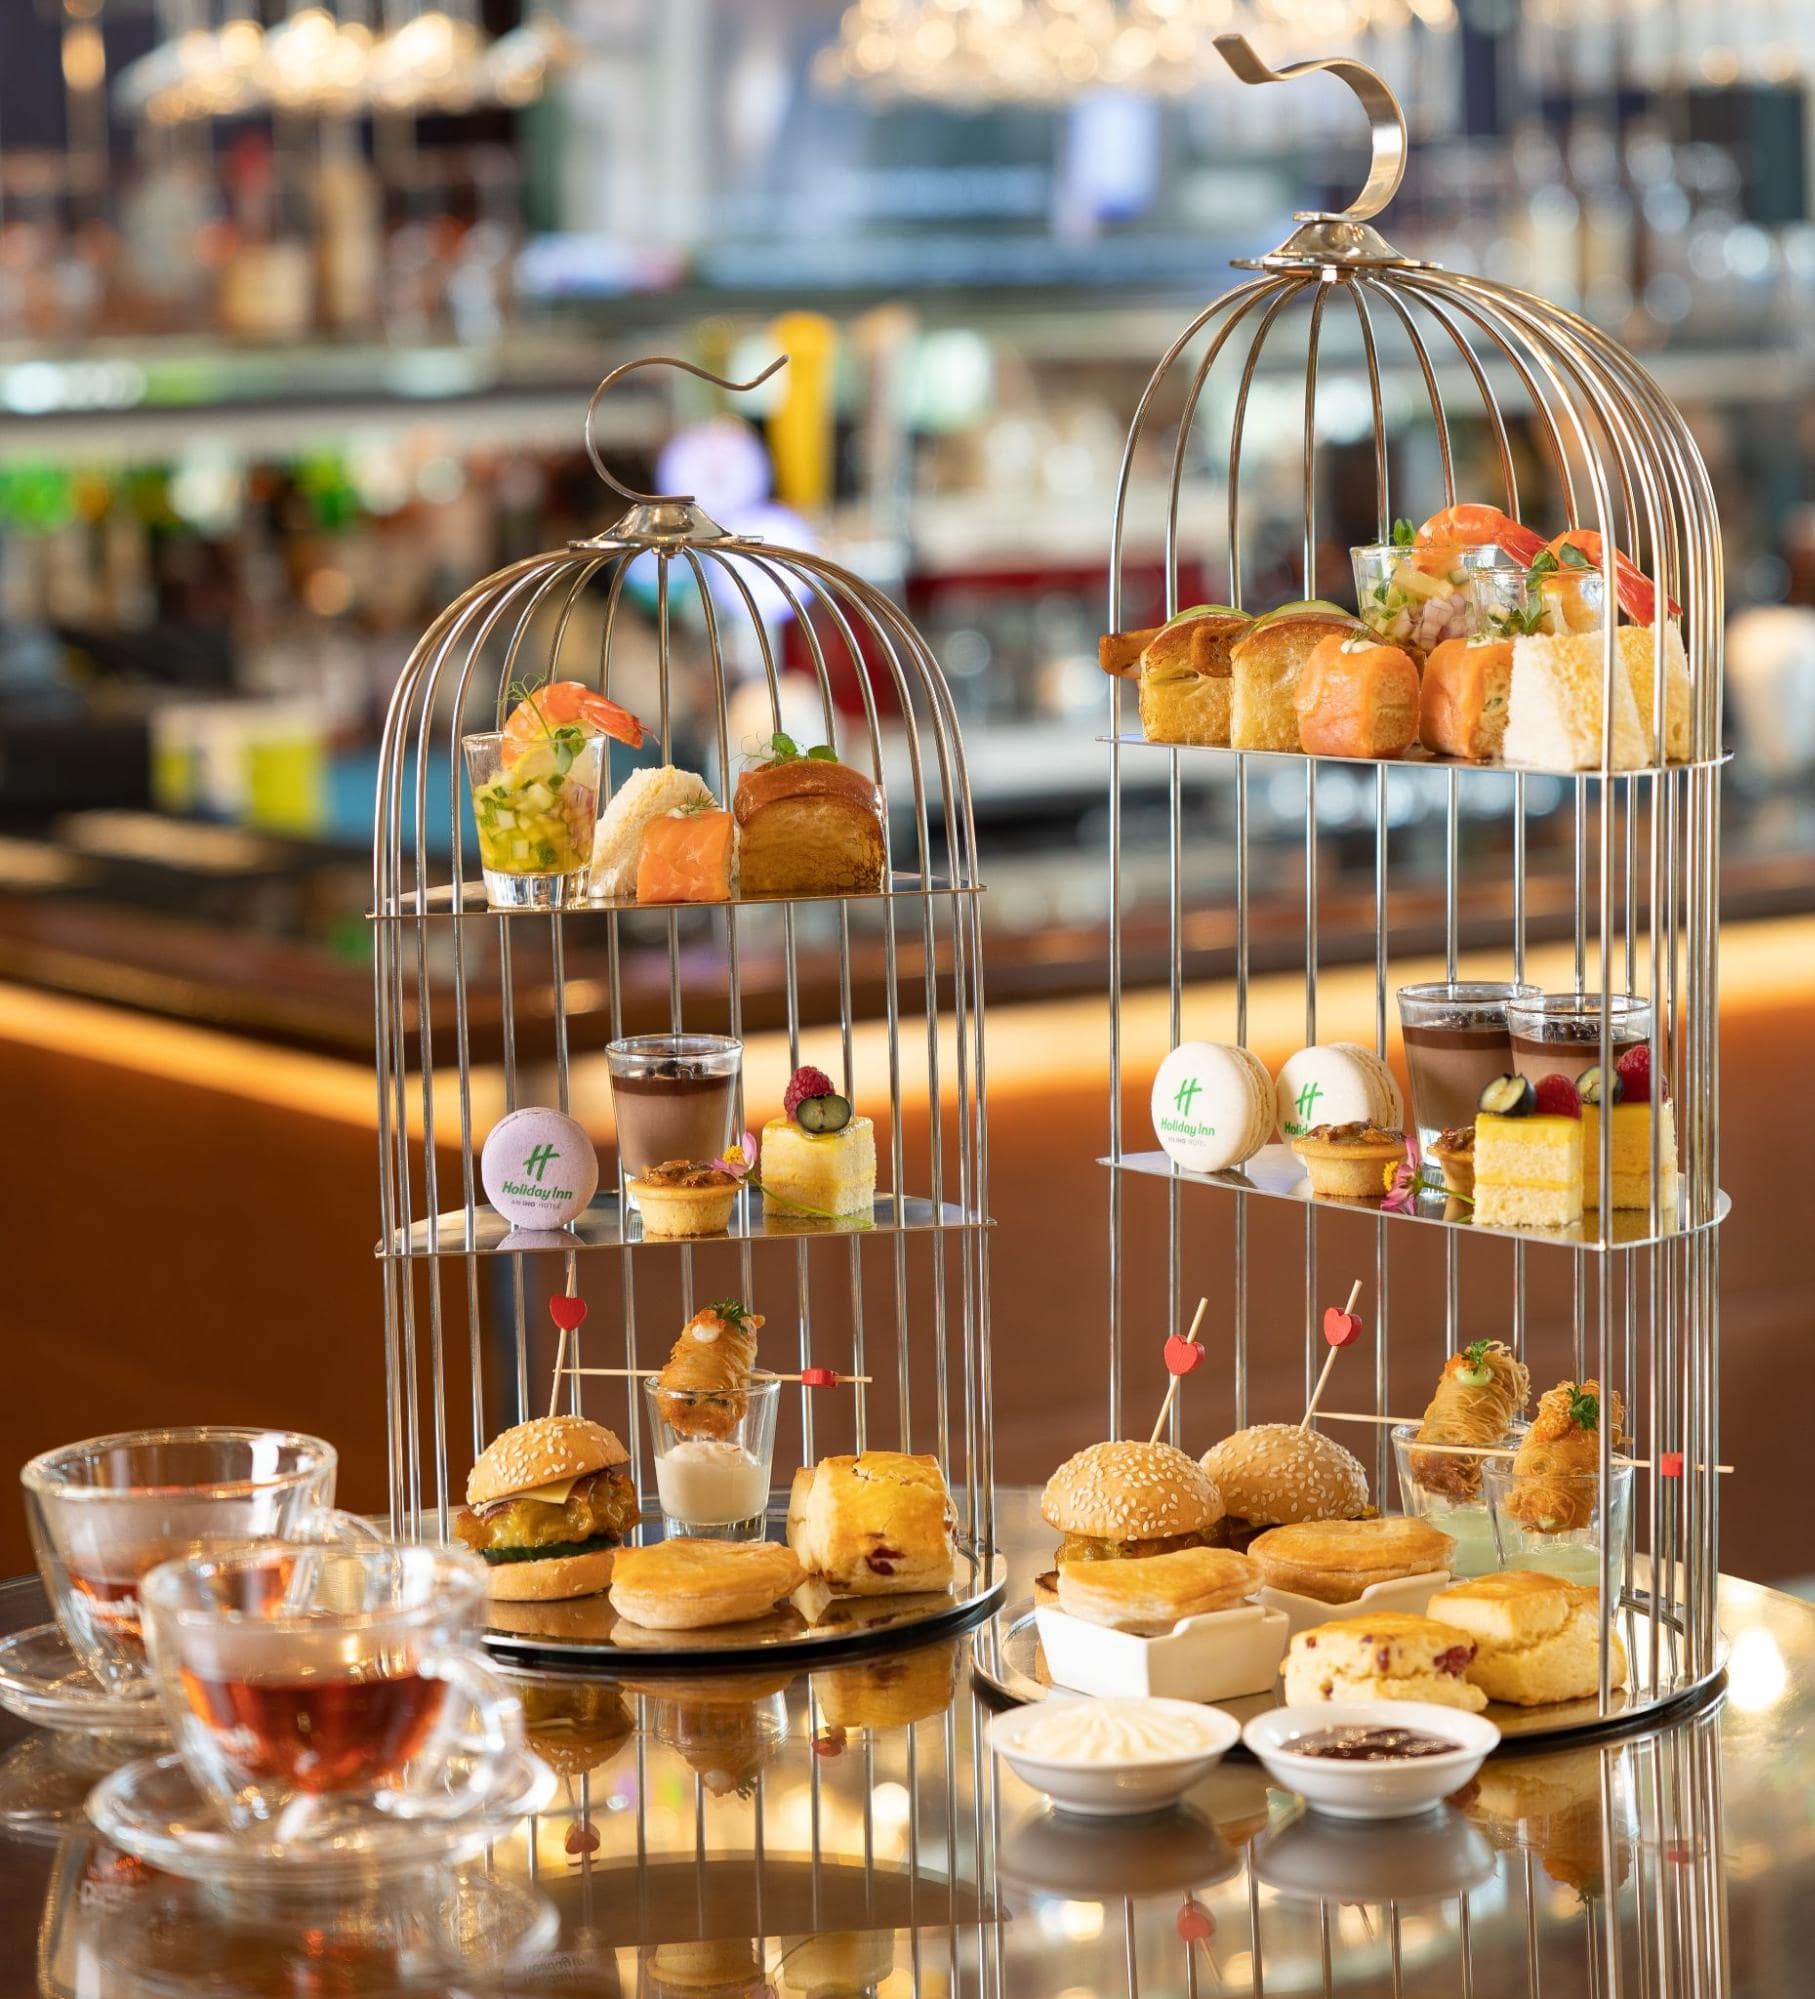 Best New Deals In October - Holiday Inn Orchard high tea servings